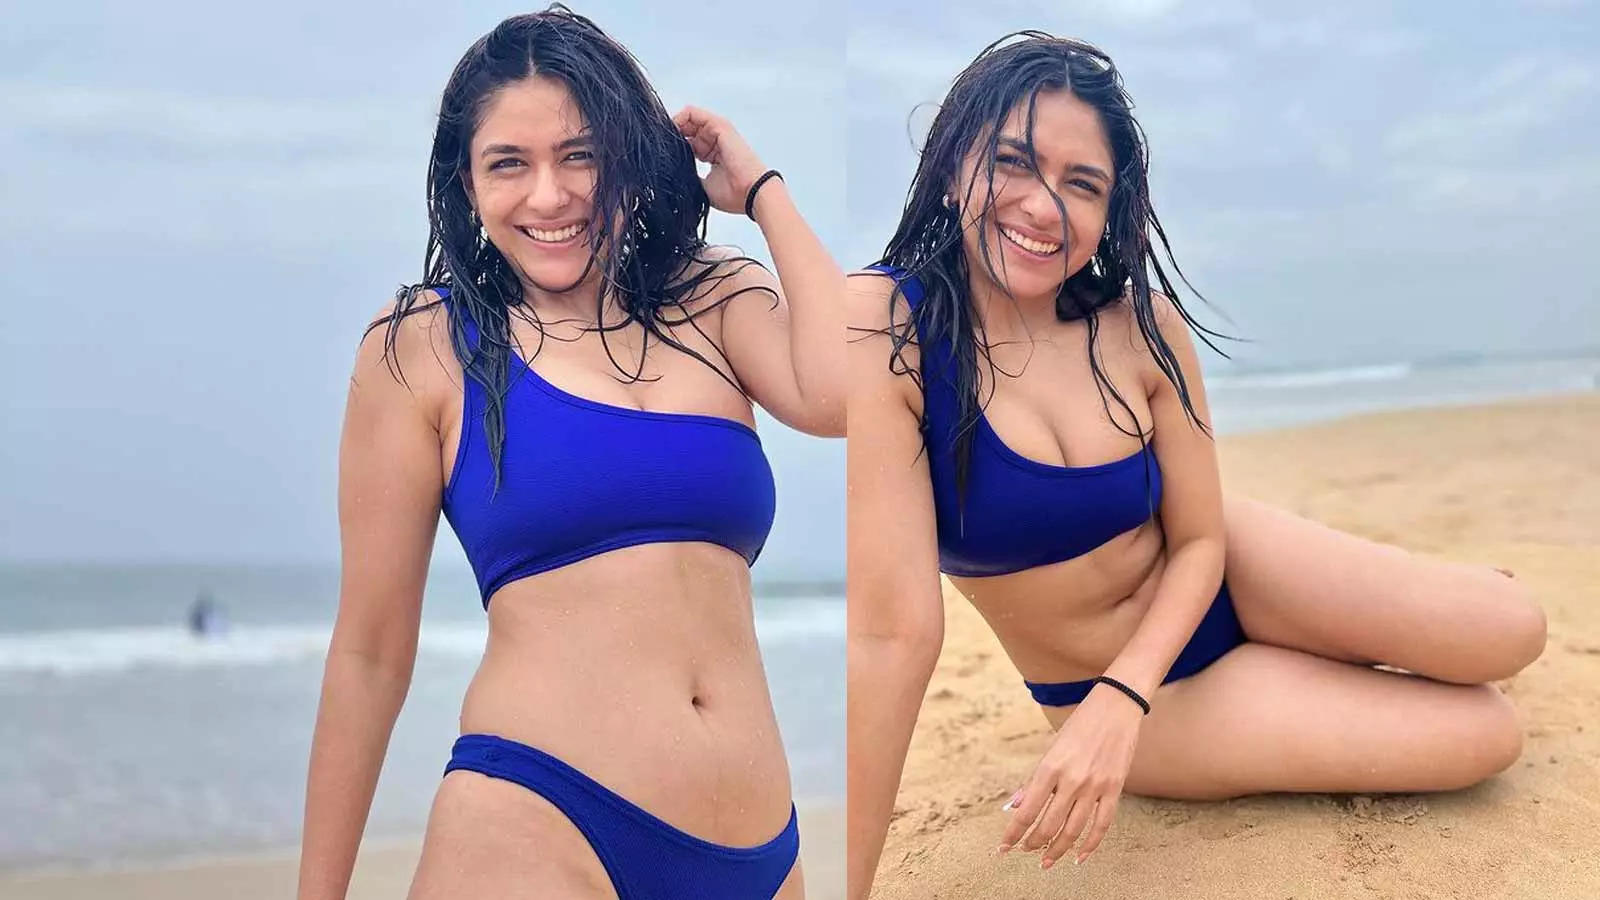 Mrunal Thakur Bikini Photo, Images, Pictures, Video Mrunal Thakur shares bikini photos from her beach vacation; fans say This is not our Sita  picture